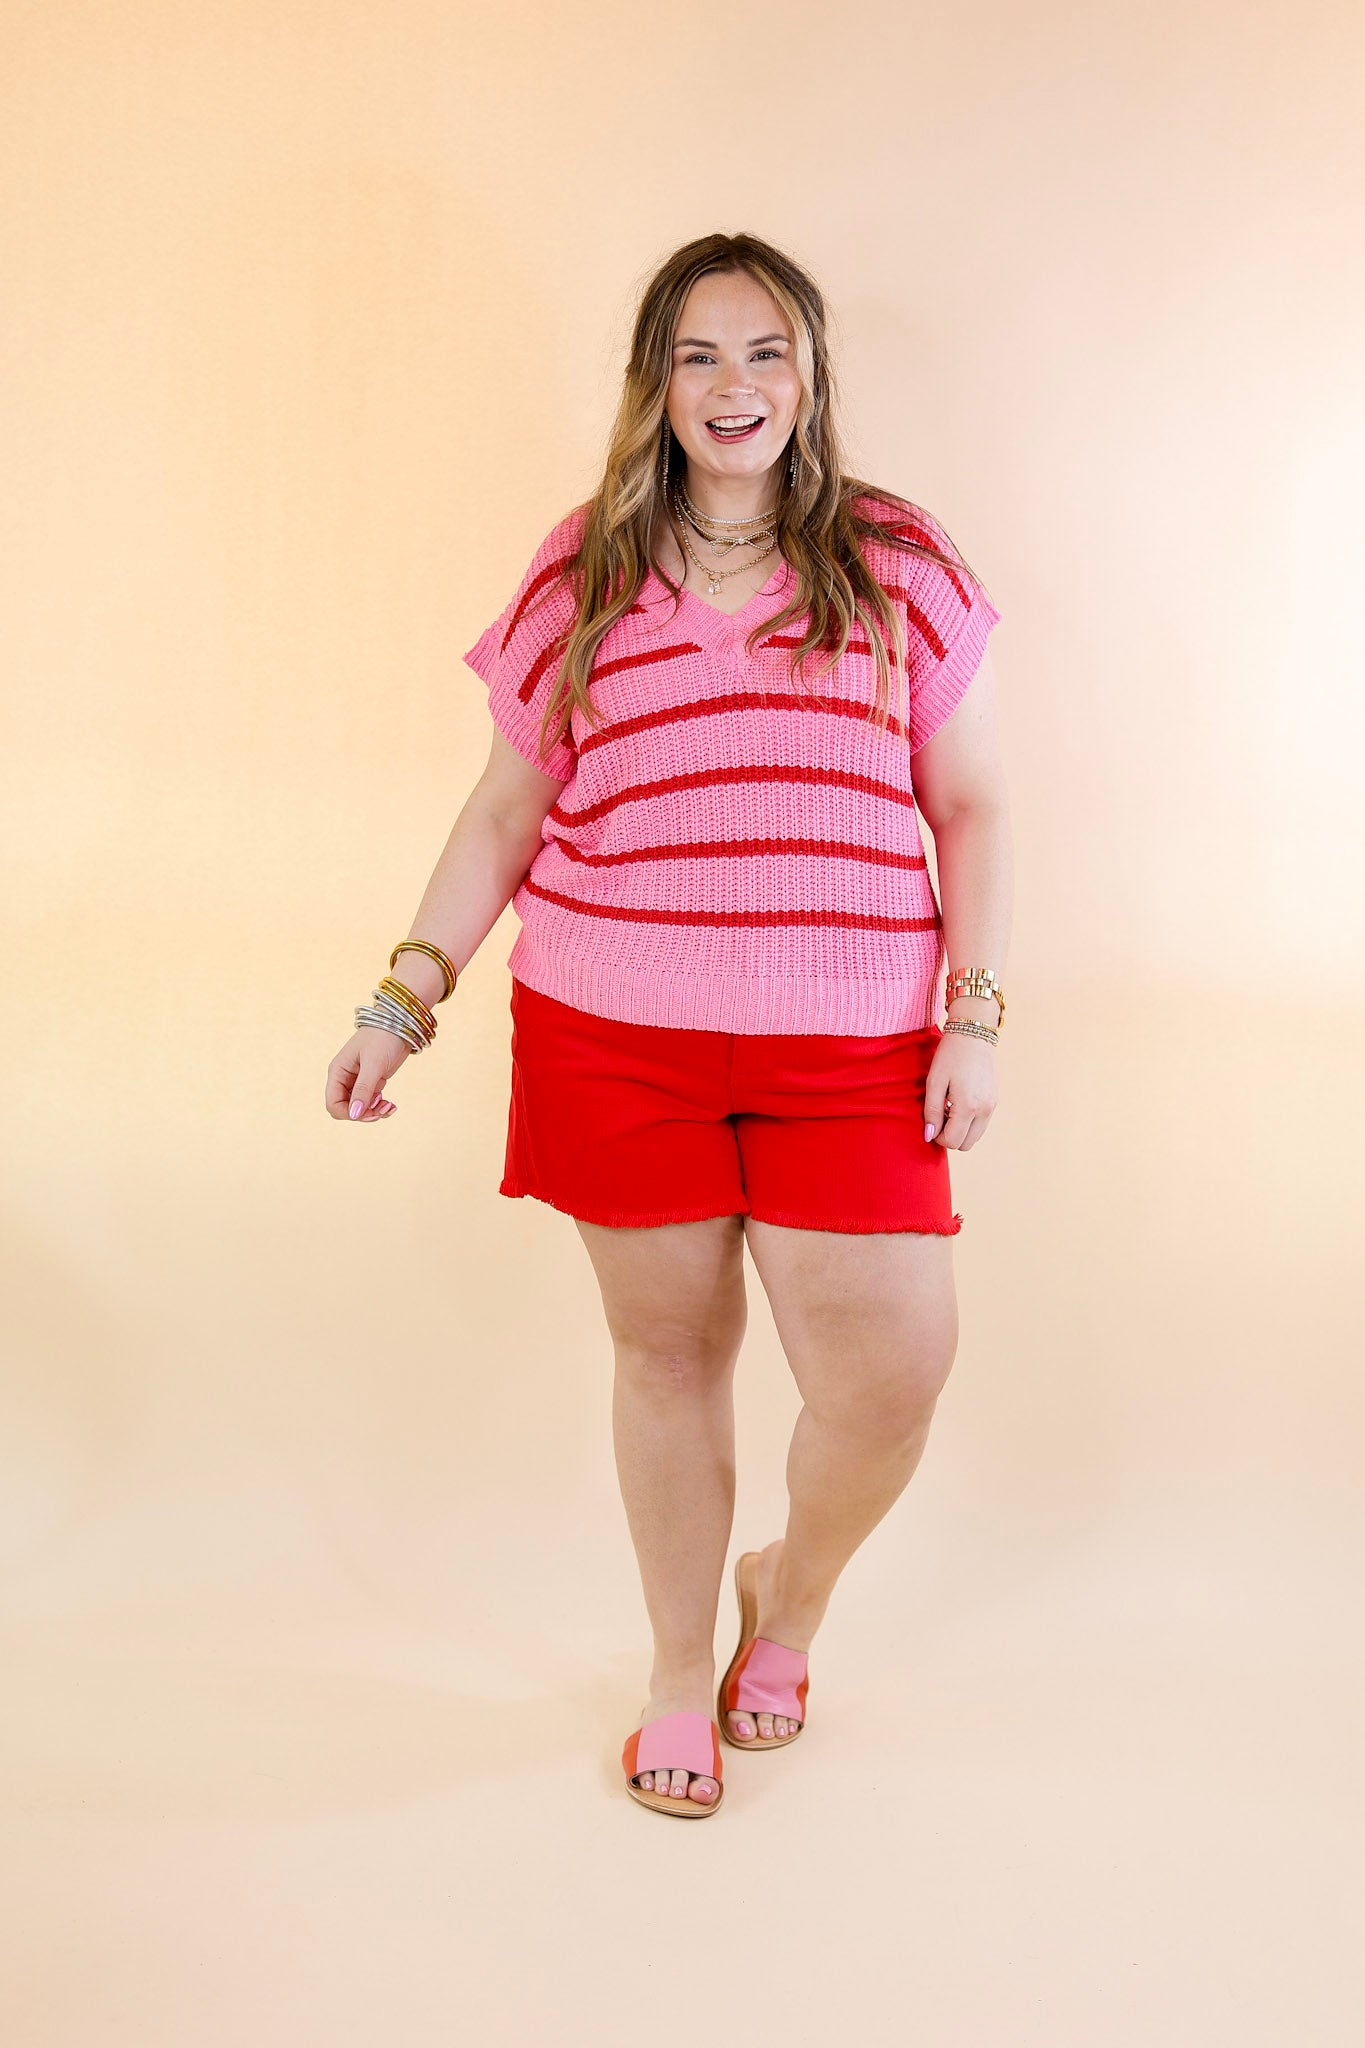 Cool Comfort Short Sleeve Striped Sweater in Pink and Red - Giddy Up Glamour Boutique